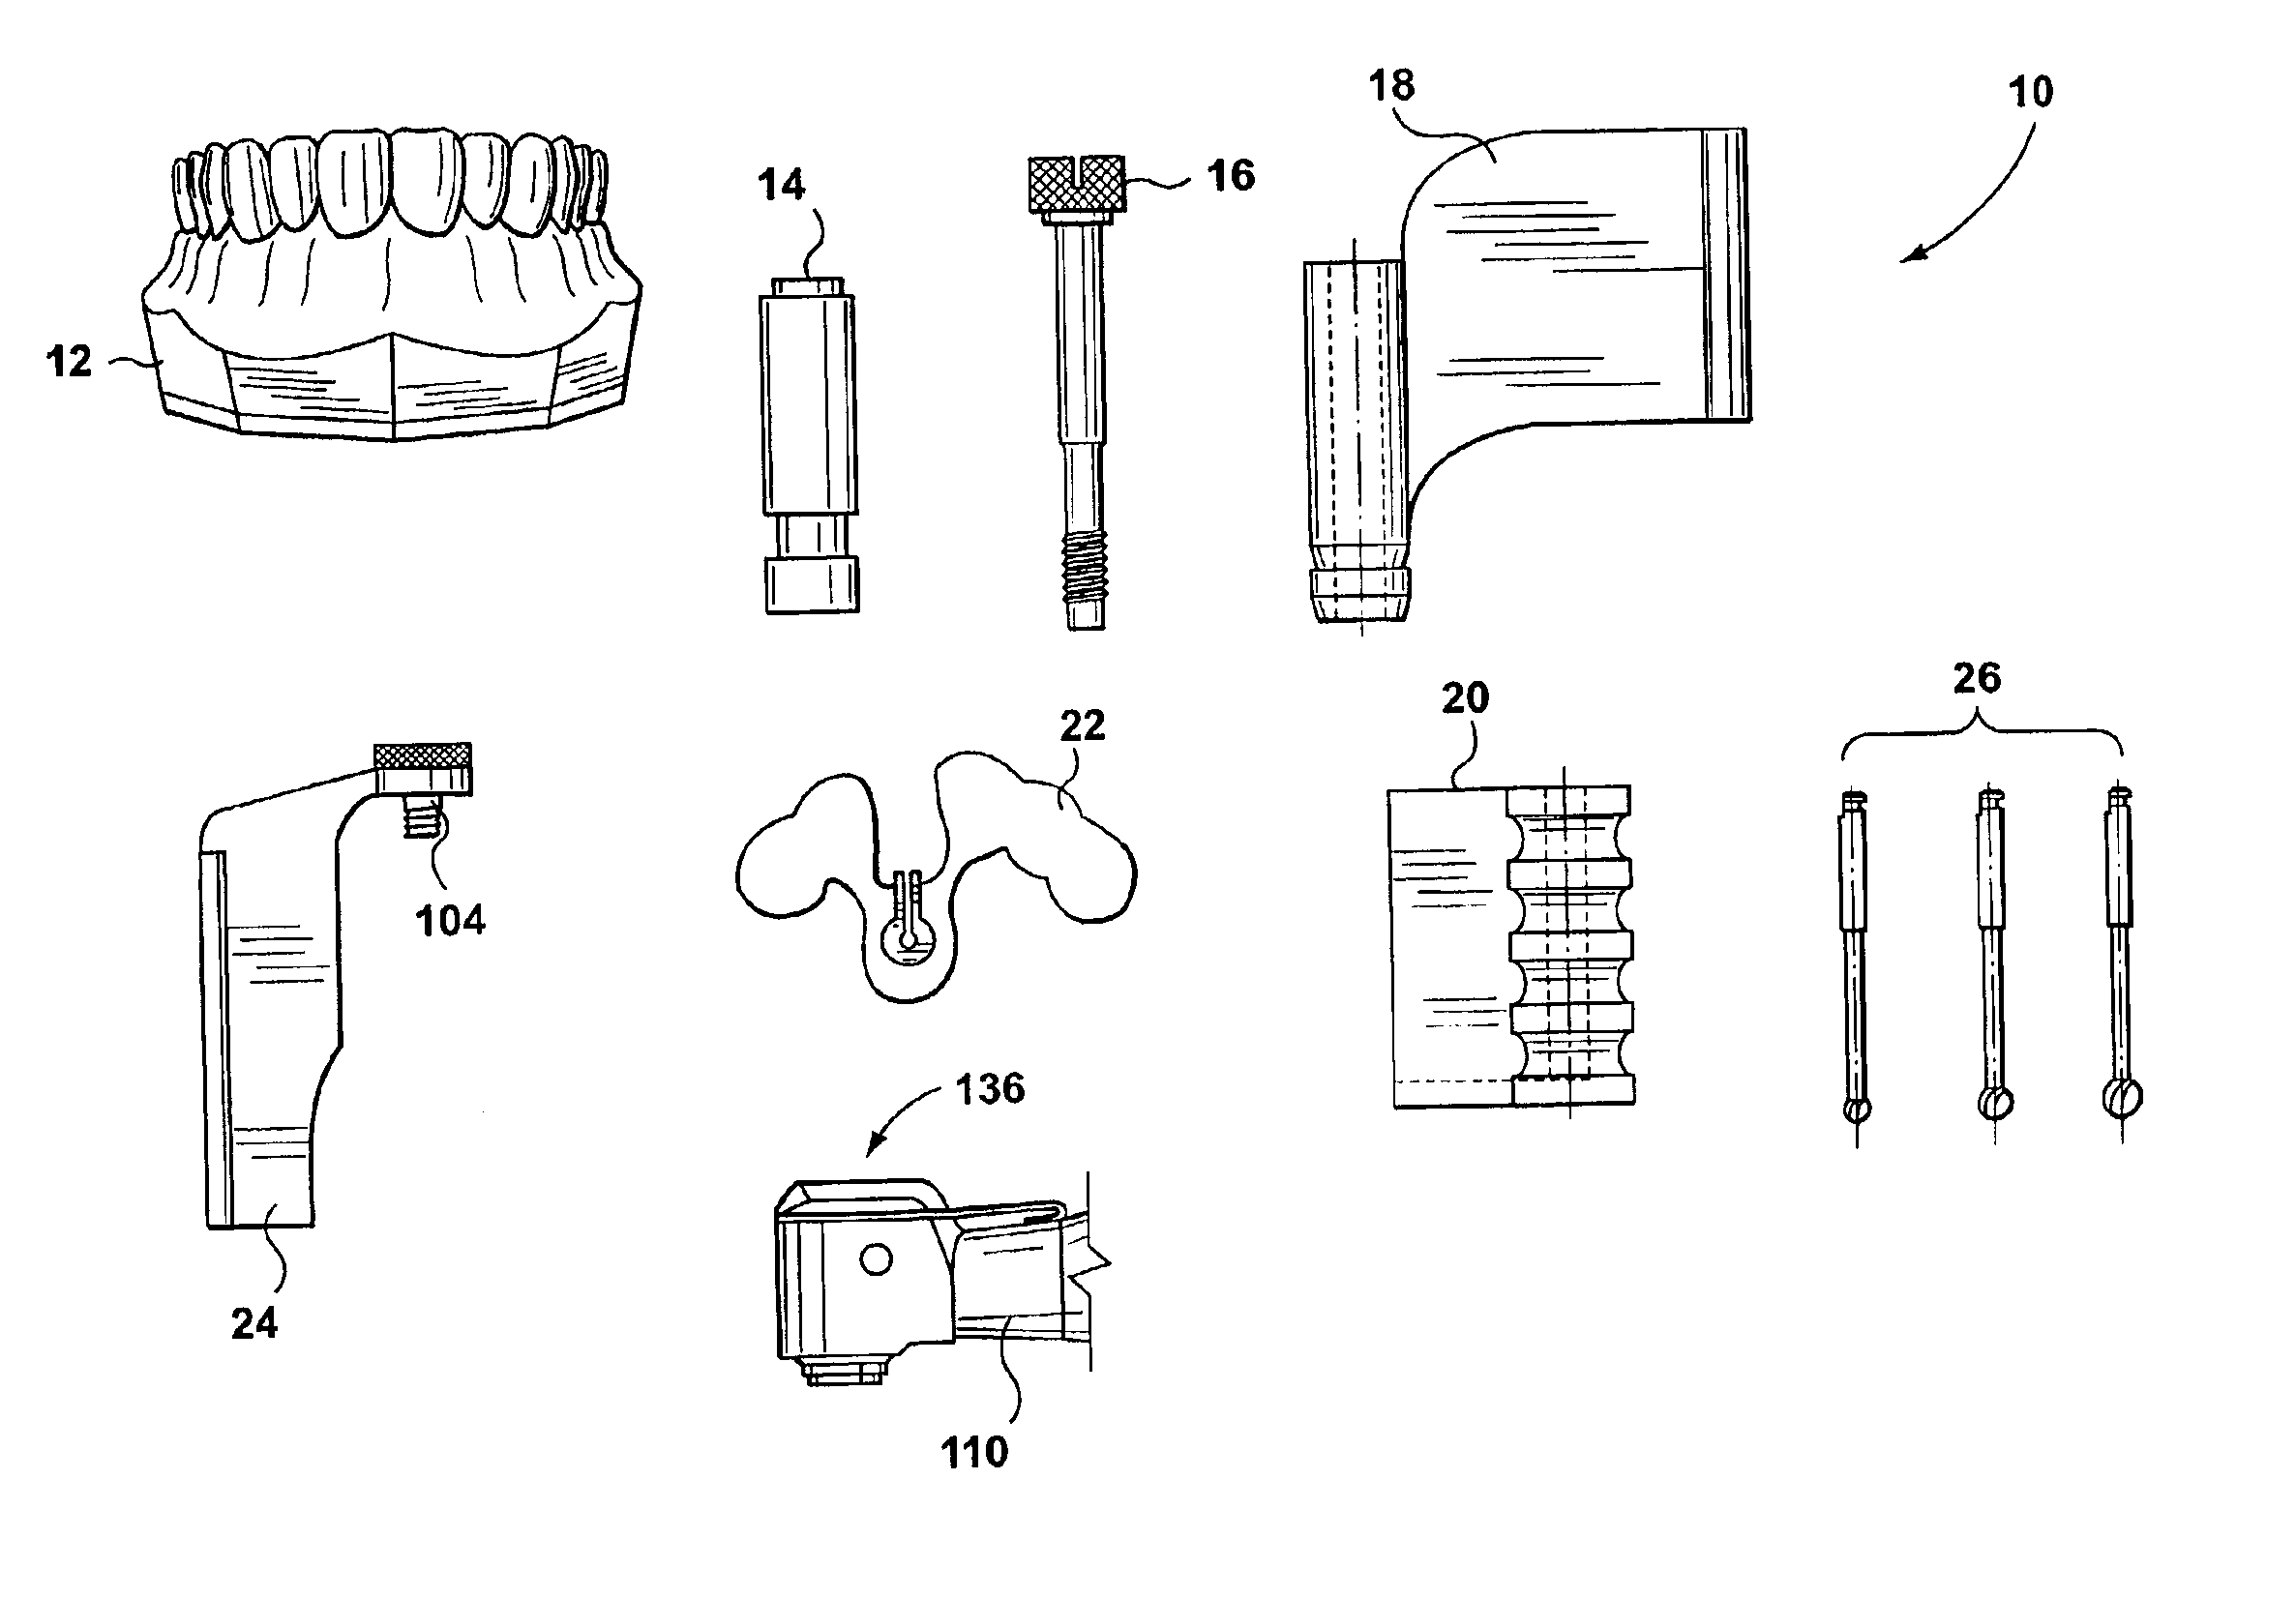 Implant positioning device and method